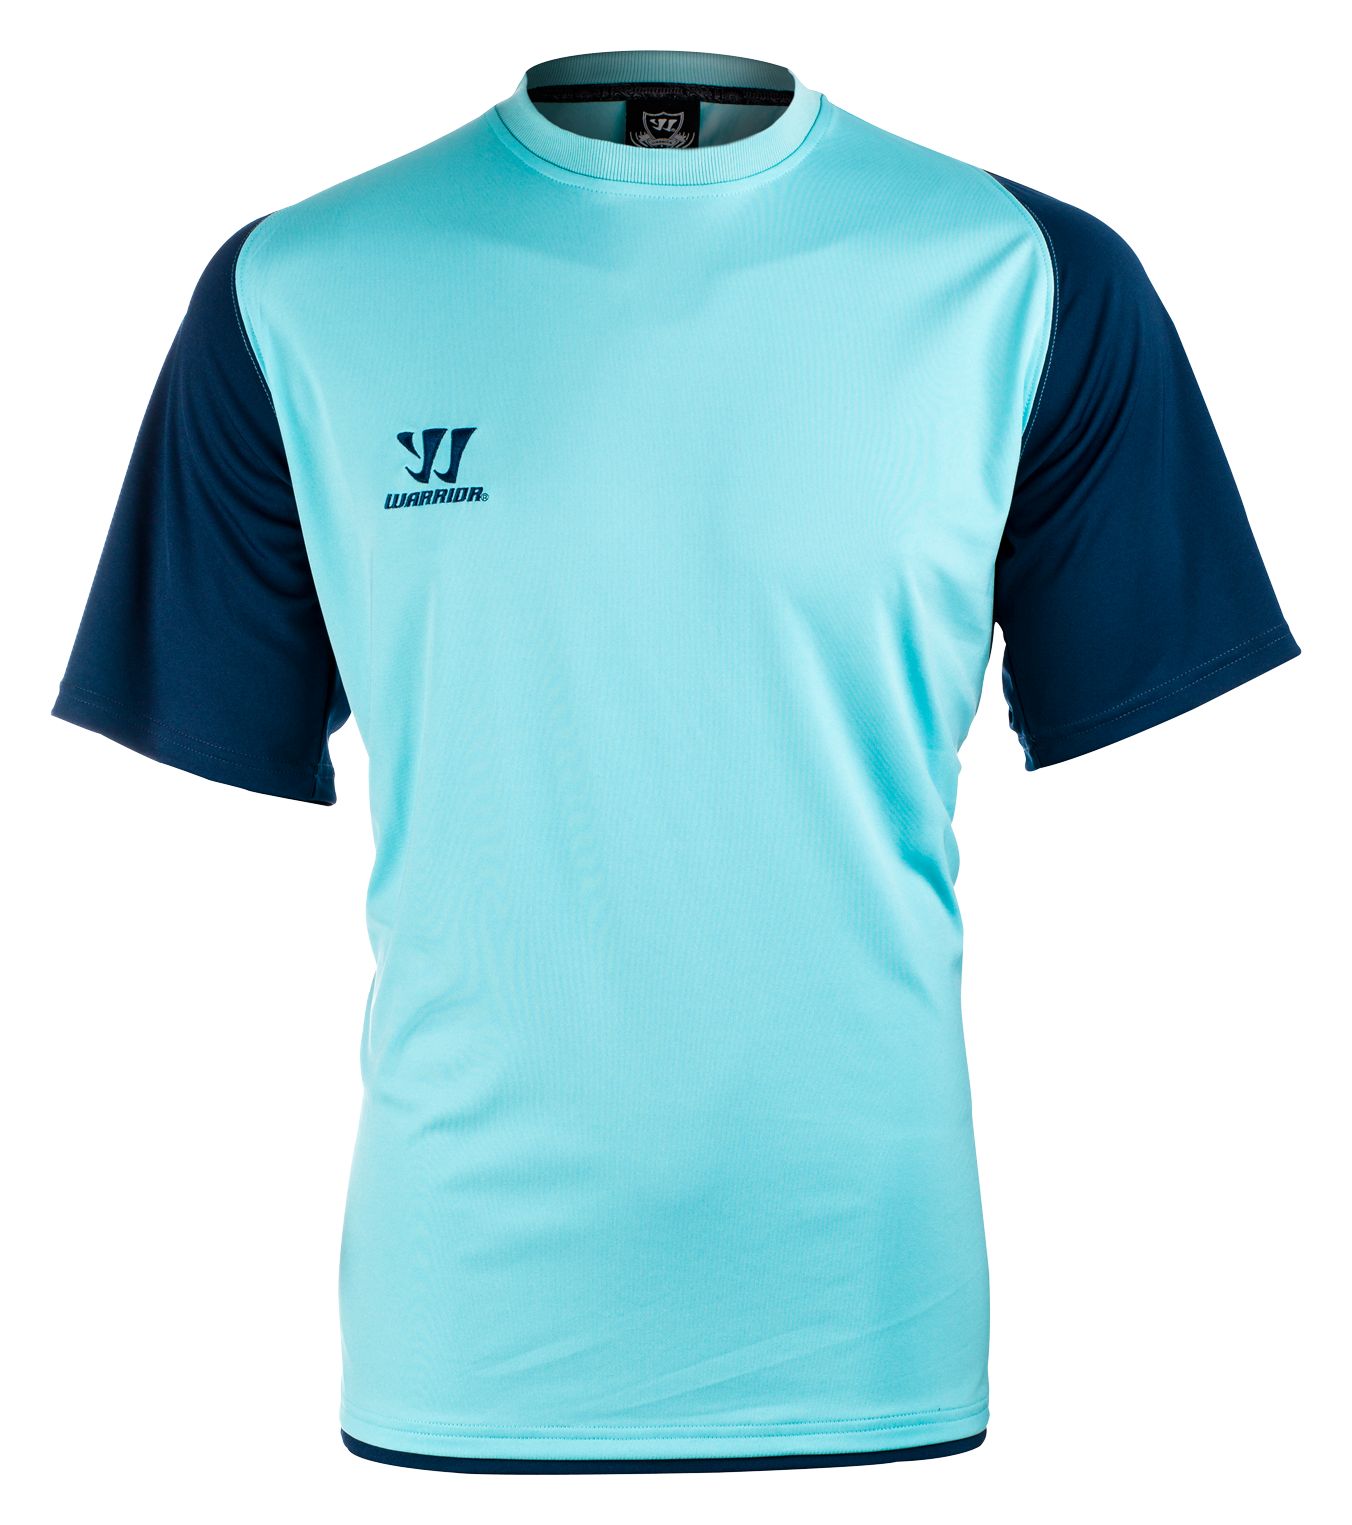 Skreamer Training SS Jersey, Blue Radiance with Insignia Blue & Bright Marigold image number 0